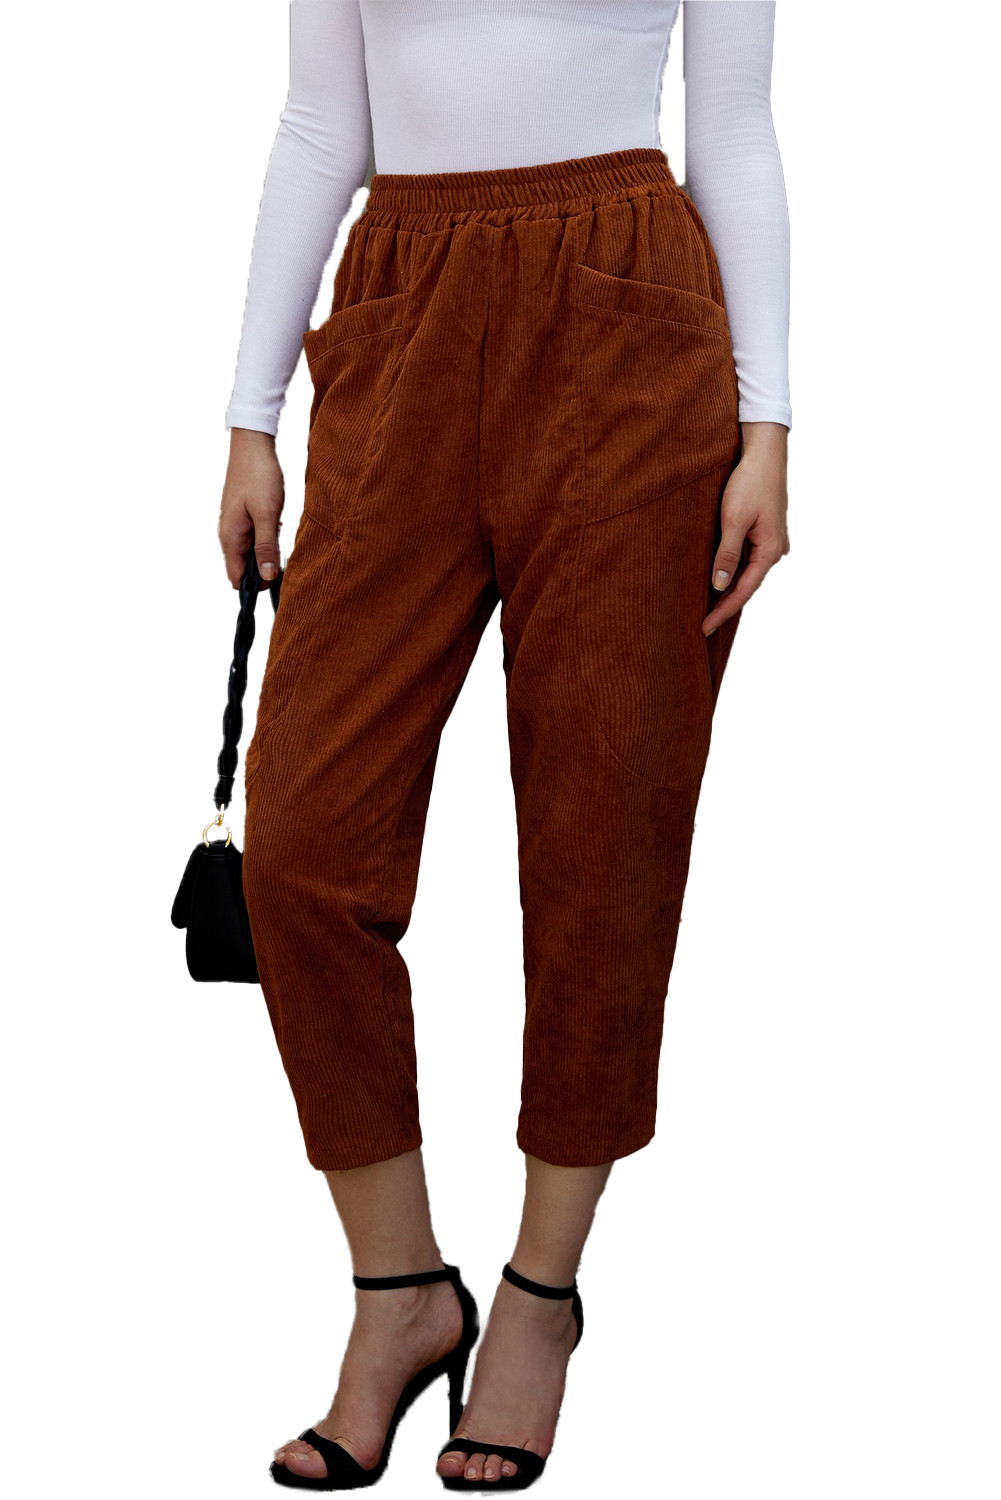 US$9.35 Brown High Waist Corduroy Cropped Pants with Pocket Wholesale 